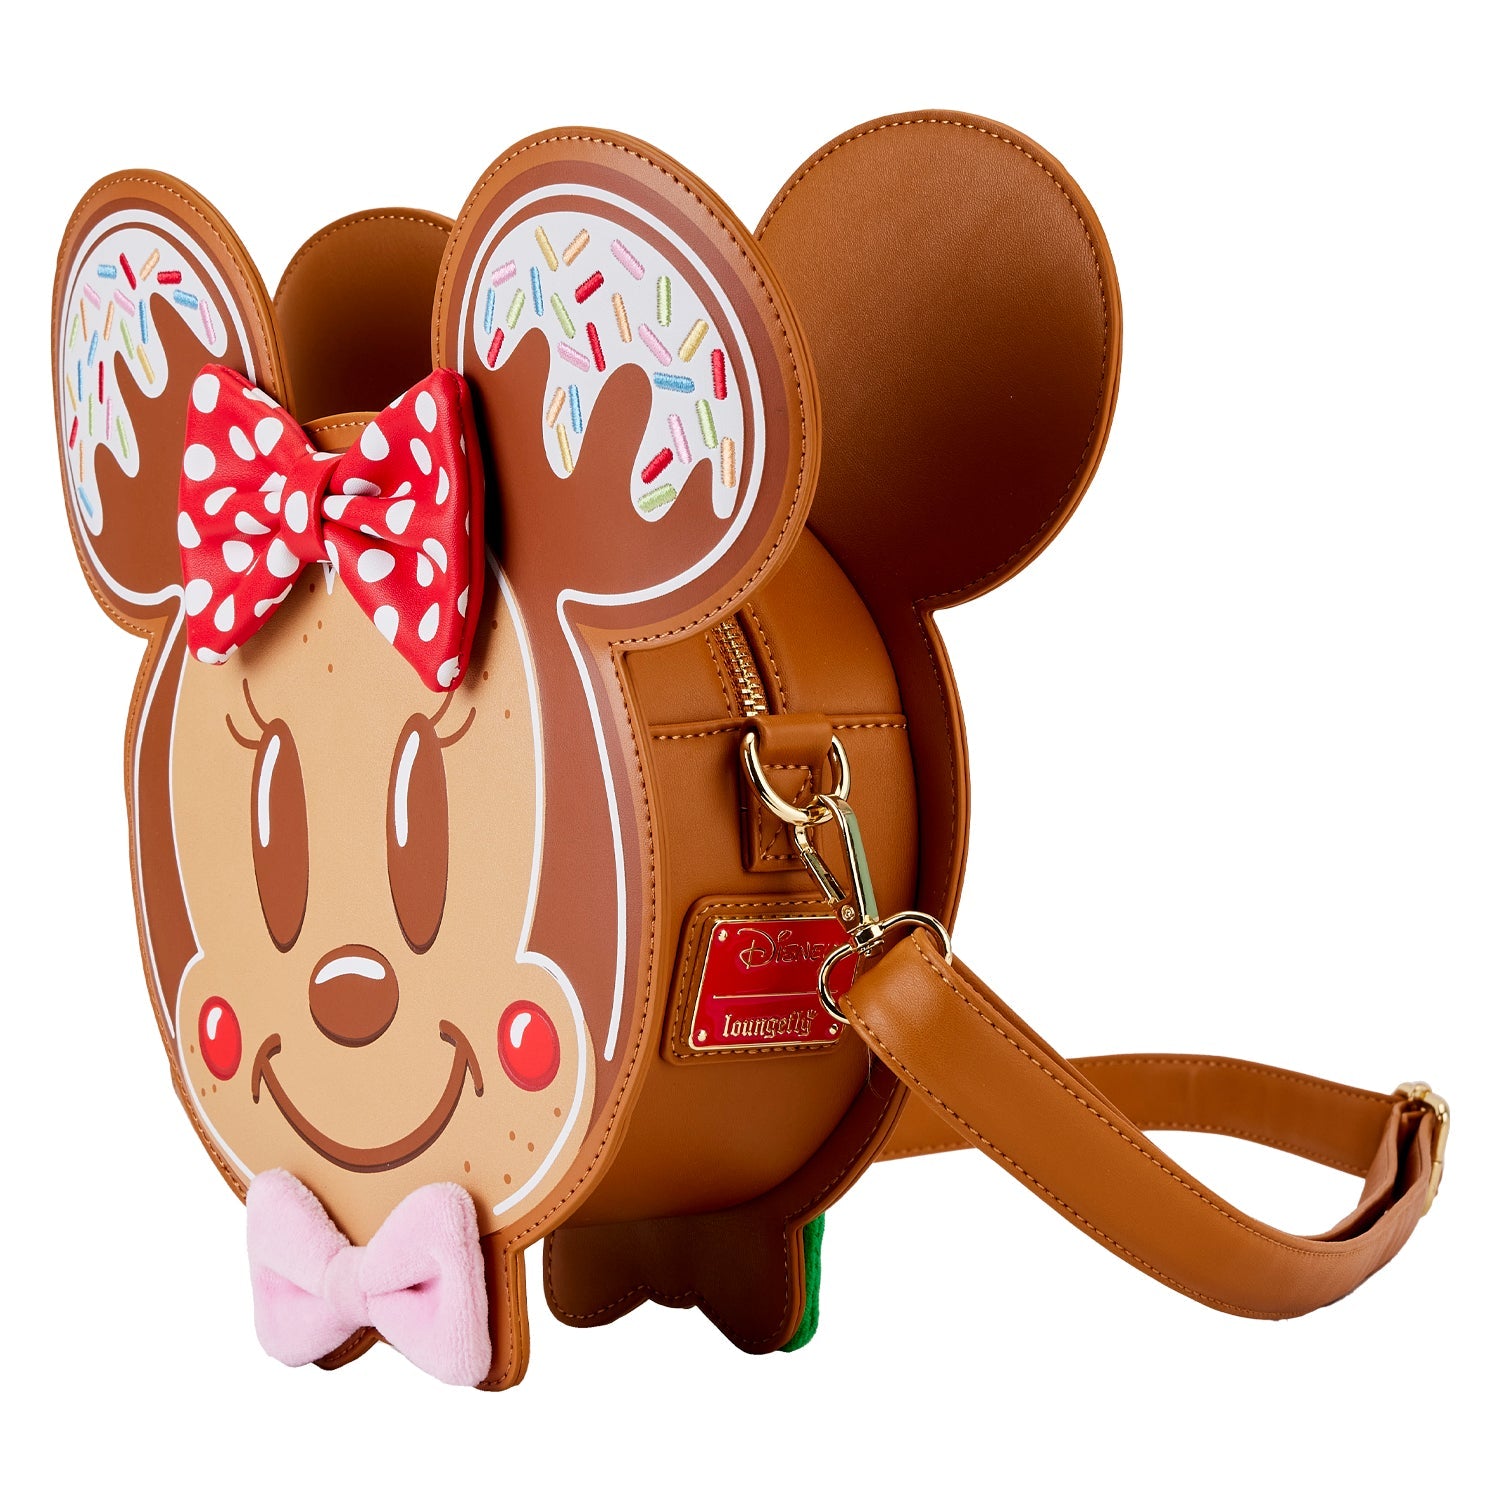 Loungefly x Disney Mickey and Minnie Gingerbread Cookie Figural Crossbody Bag - GeekCore